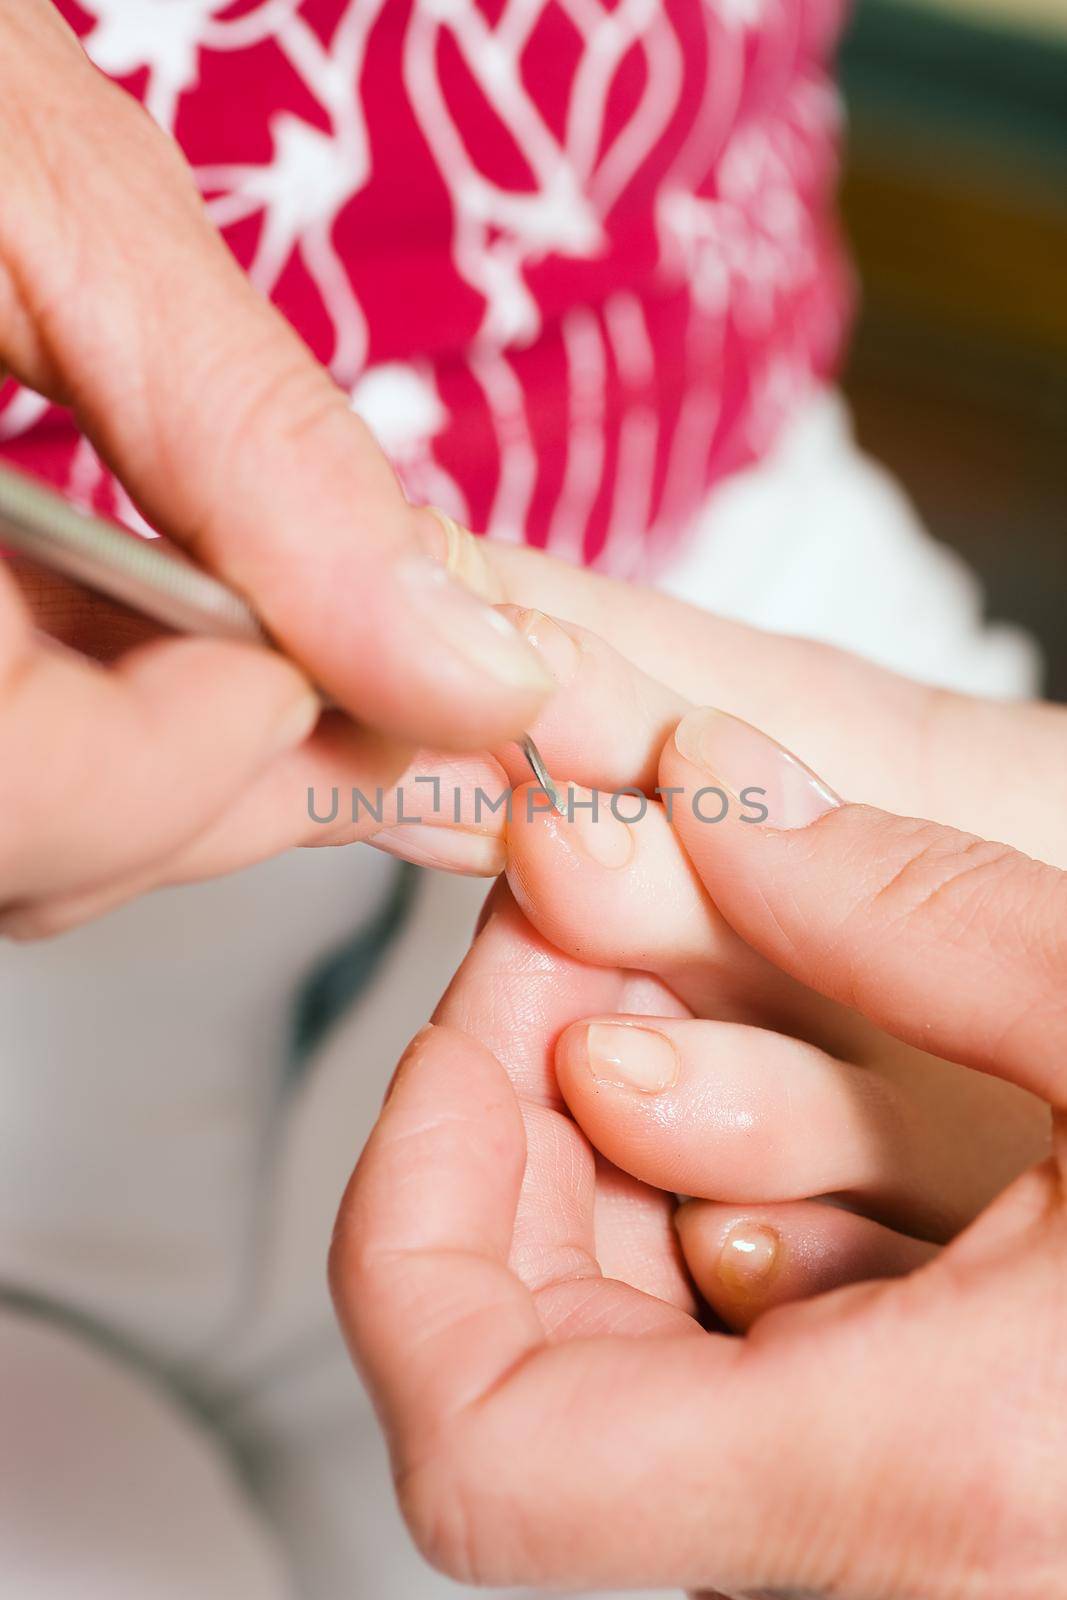 Woman practicing chiropody taking care of a feet; focus on hands and tool